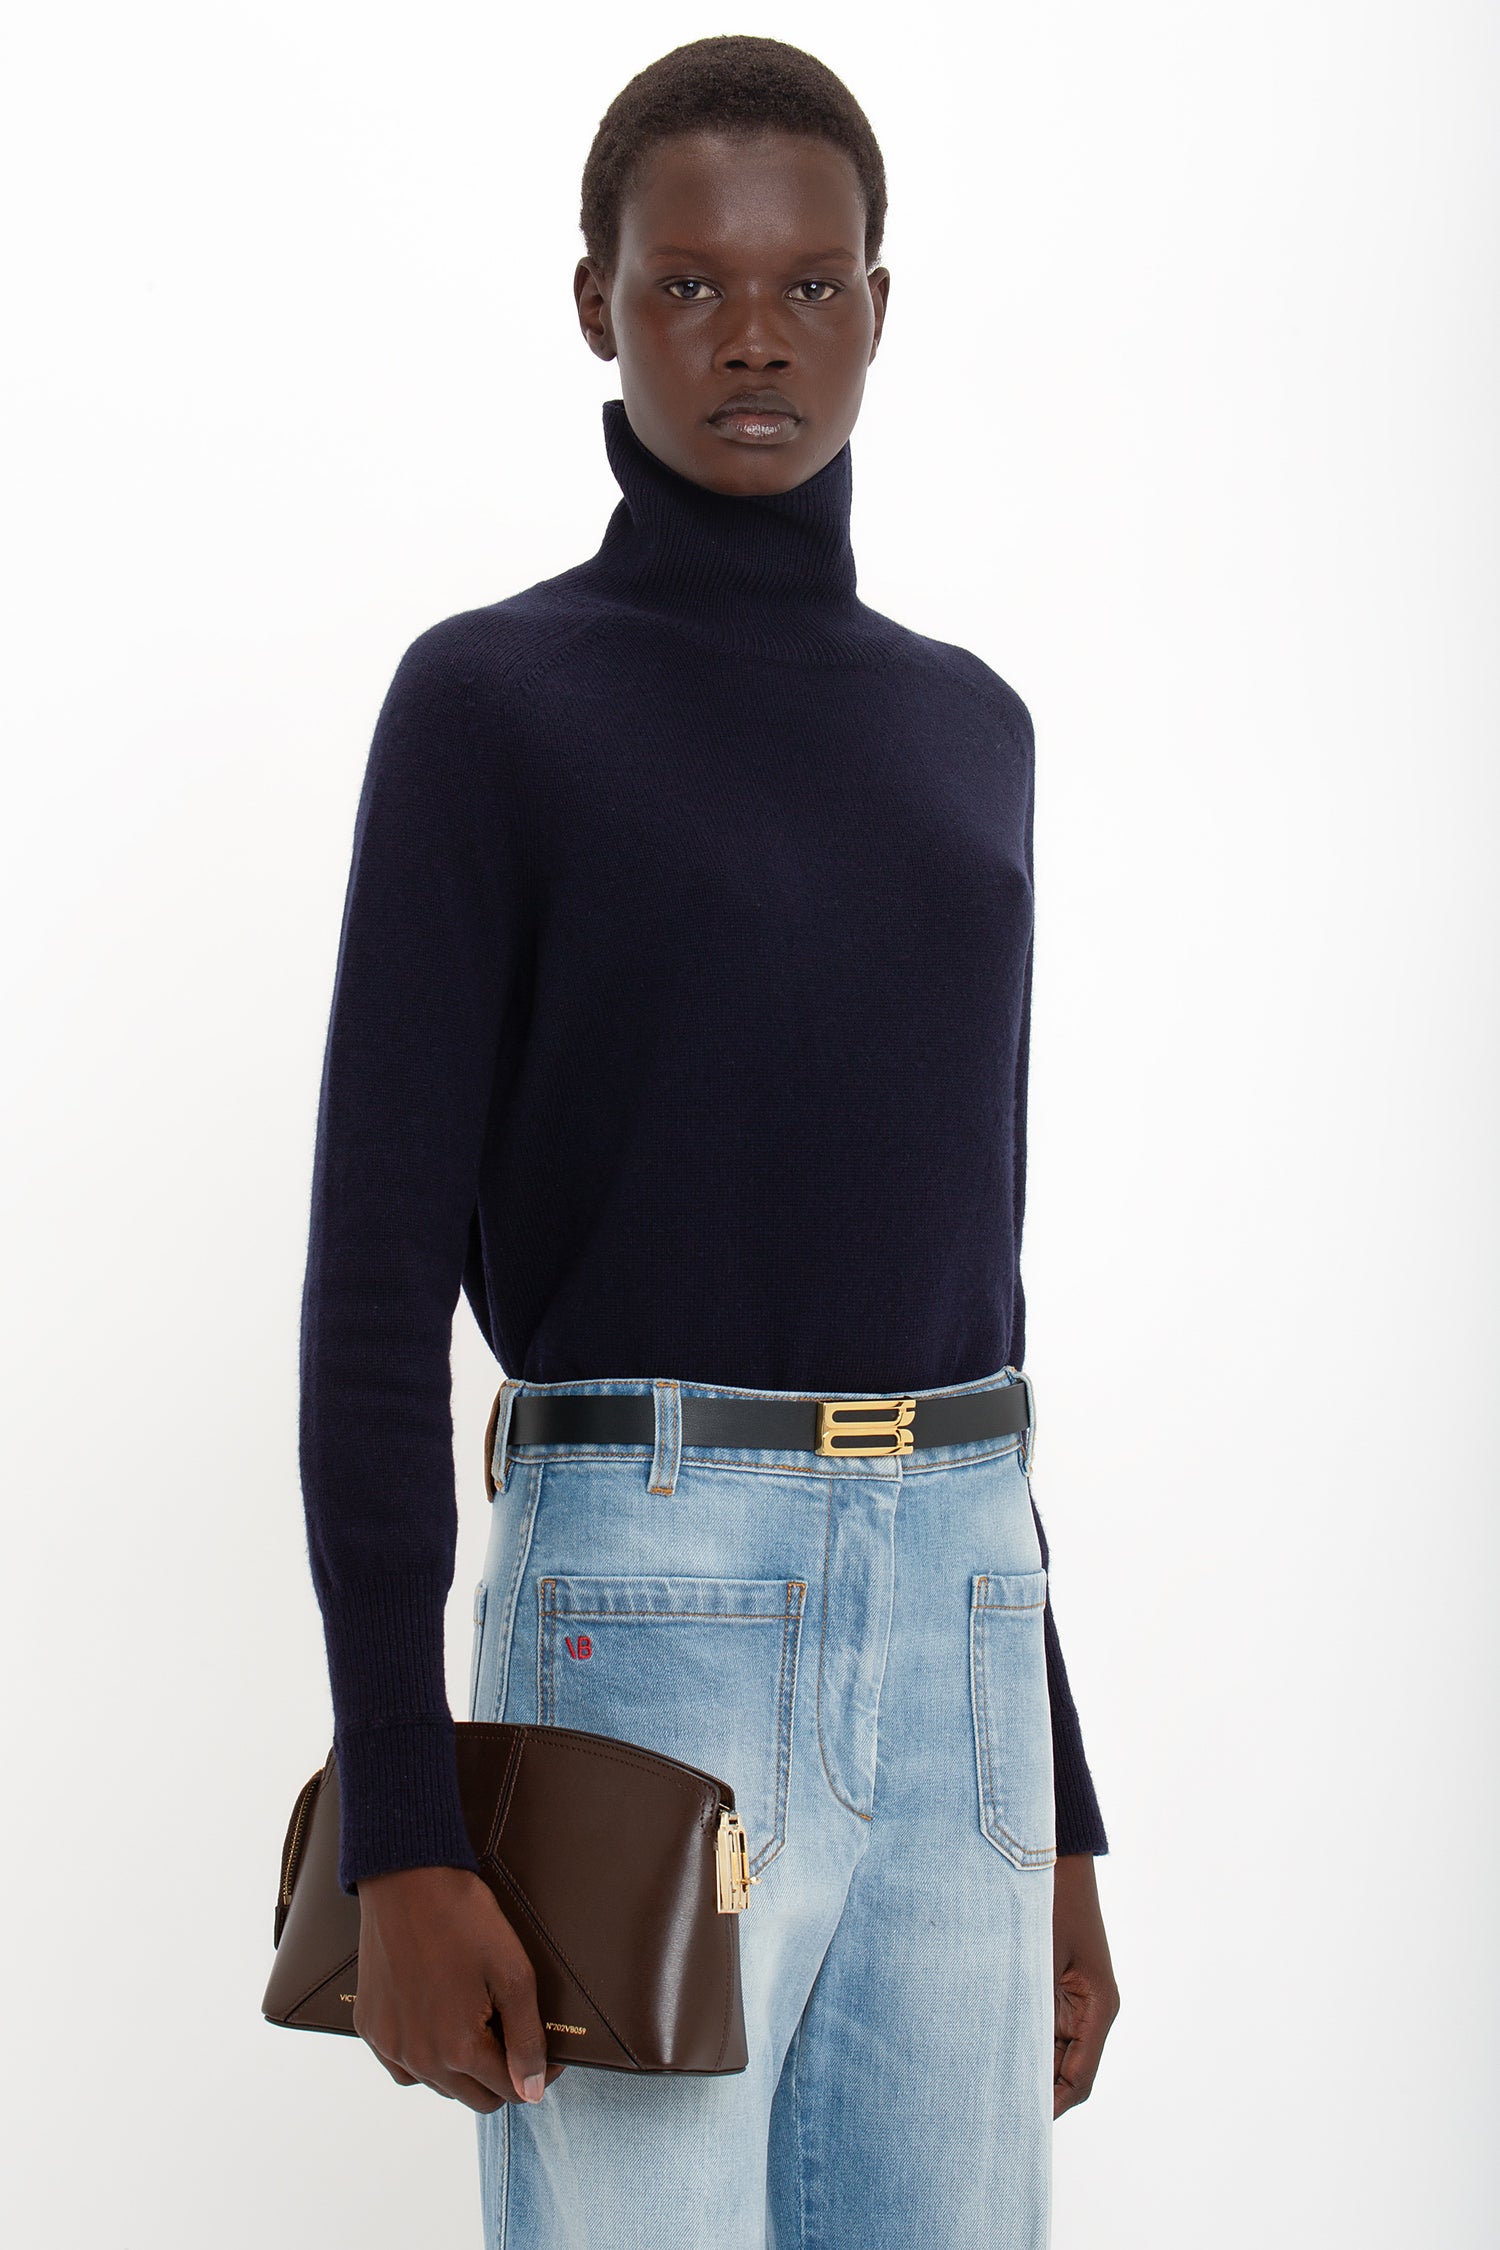 Person wearing a navy turtleneck sweater and Victoria Beckham Alina High Waisted Jean In Light Summer Wash, holding a brown clutch purse, standing against a white background.